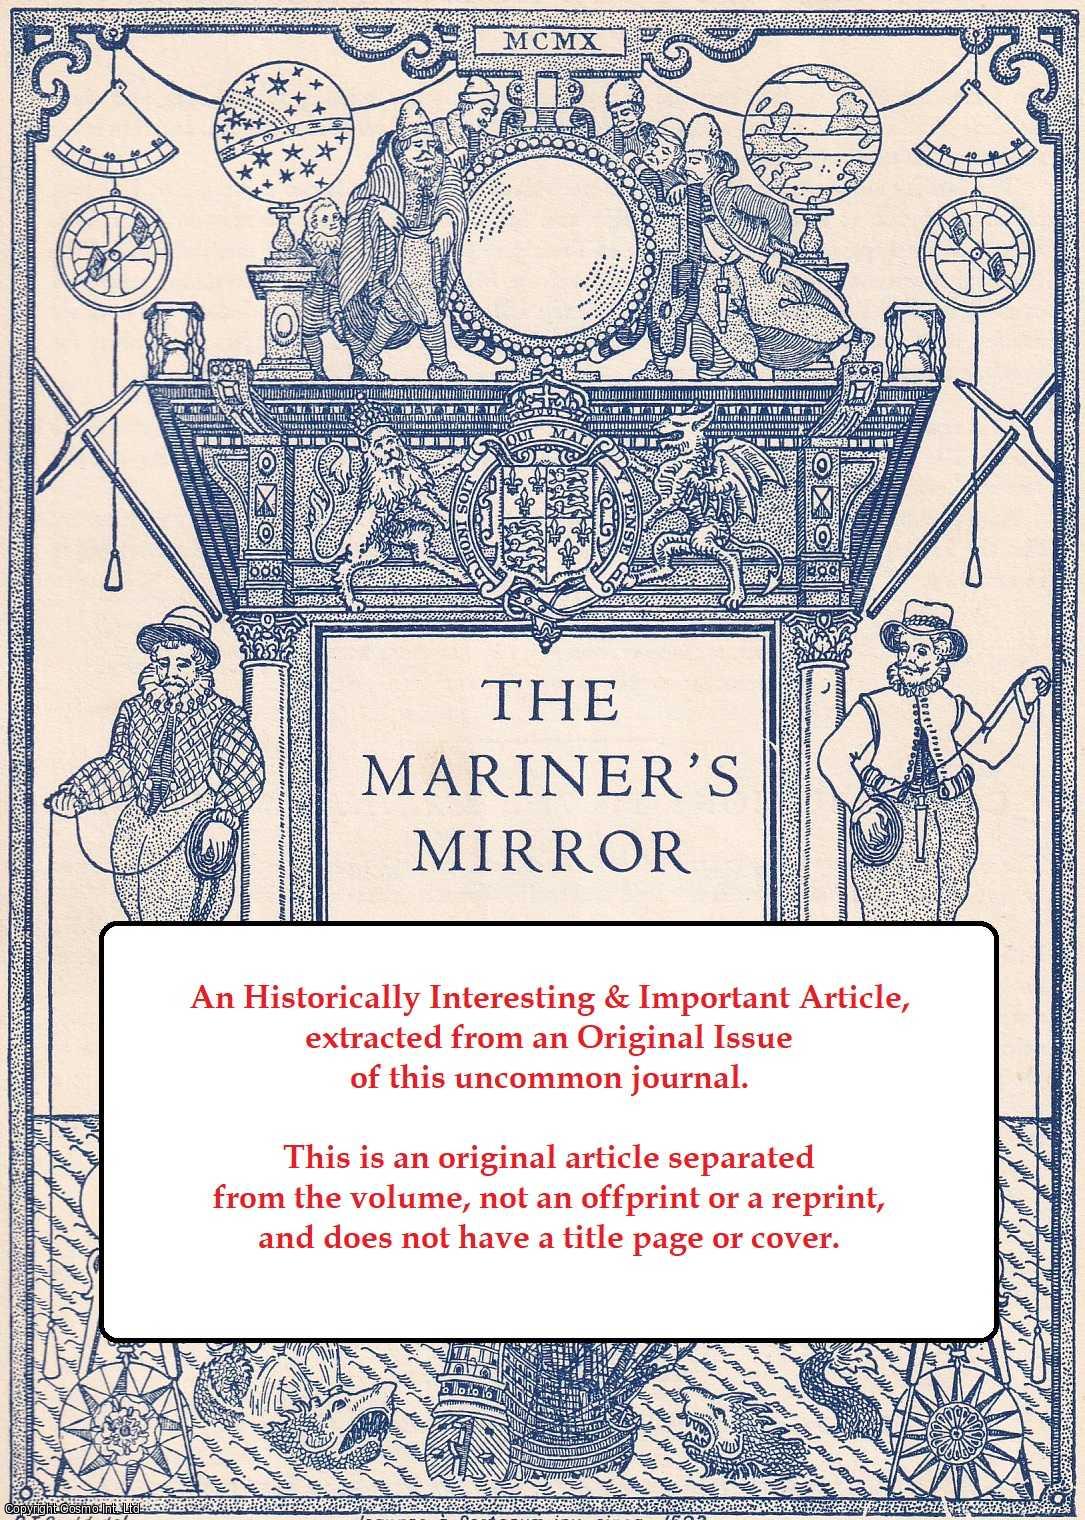 R. H. Boulind - The Crompster in Literature and Pictures. An original article from the Mariner's Mirror, 1968.